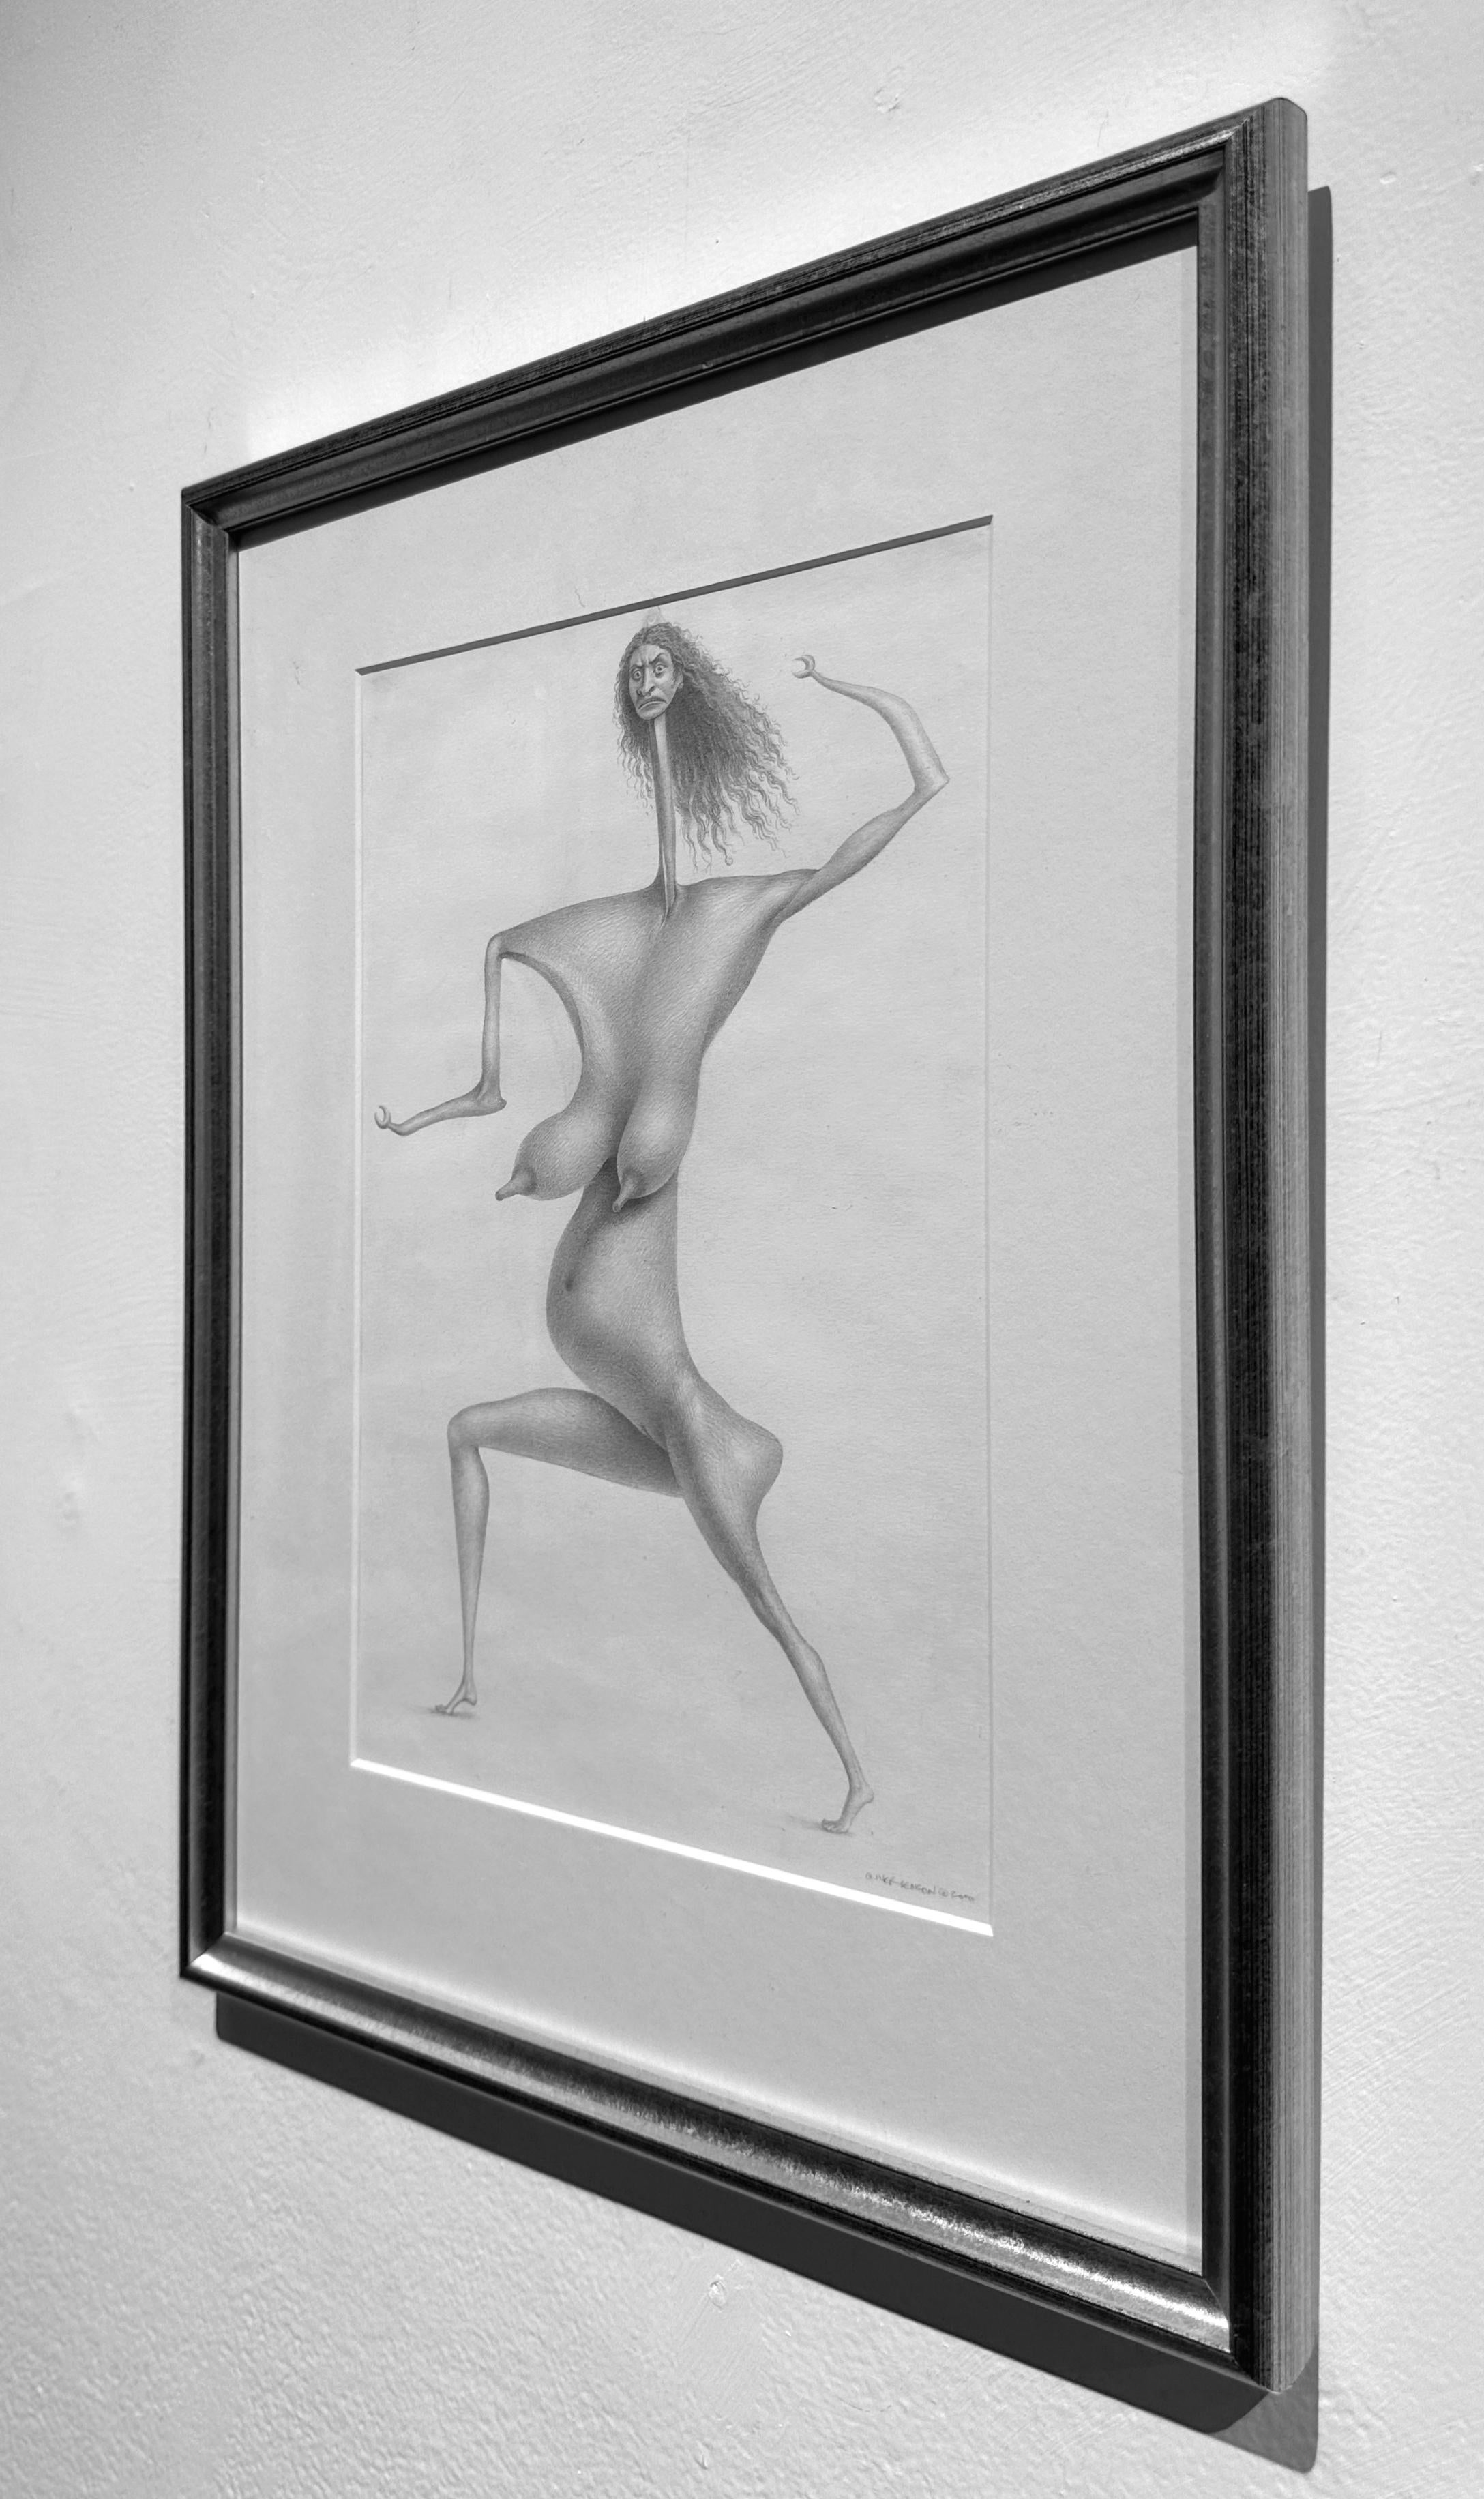 An overly exaggerated nude figure is the subject of Oliver Hazard Benson's drawing entitled 